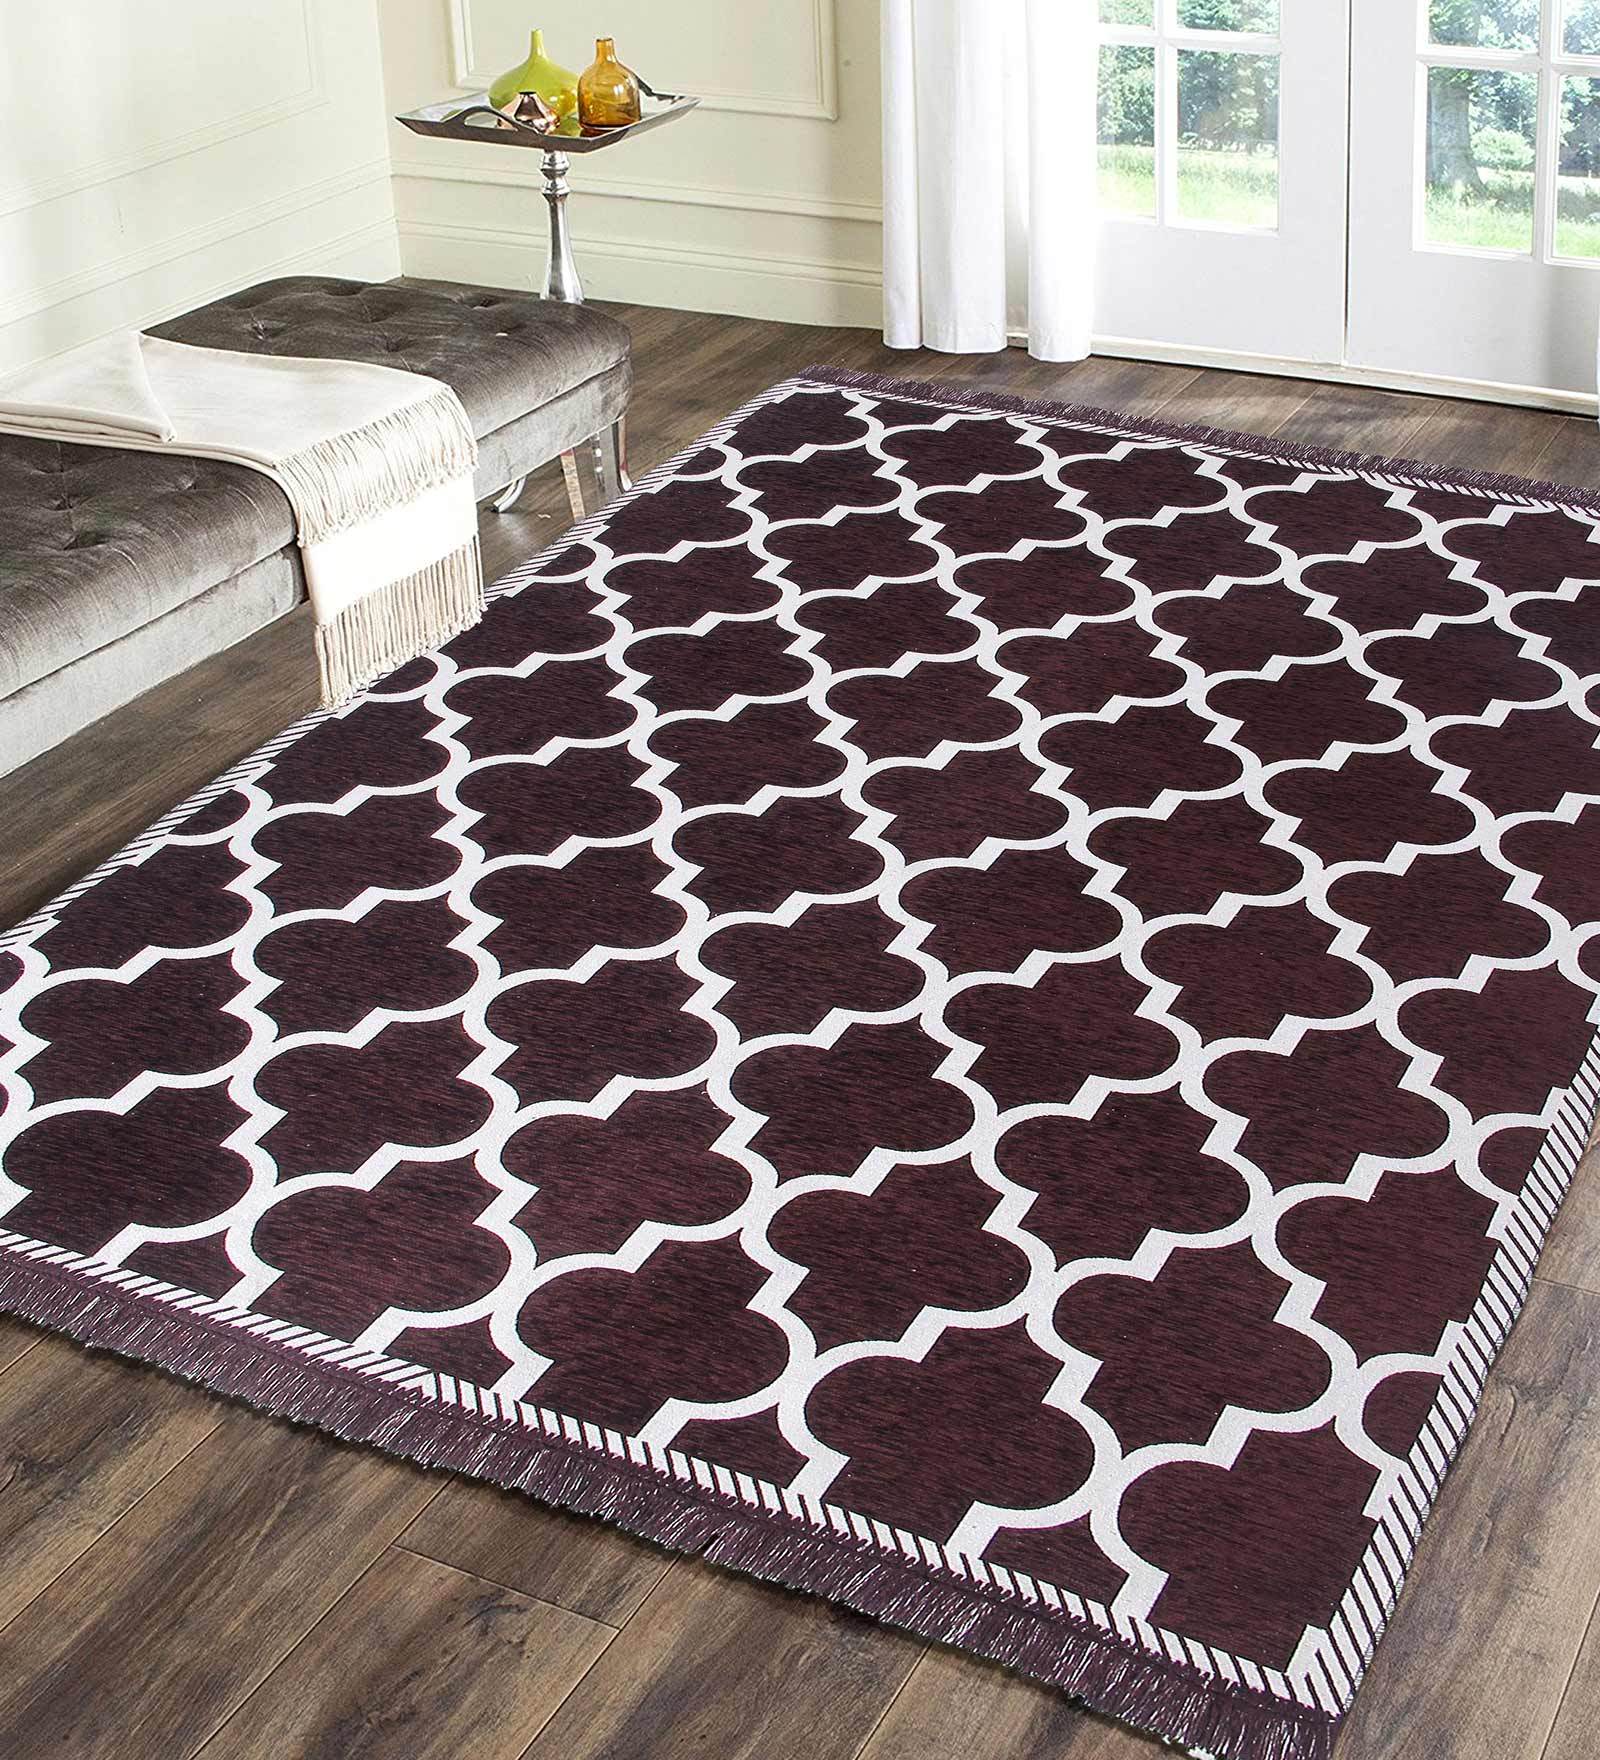 Brown Abstract Chenille 4 ft x 6 ft Machine Made Carpet, By Braids 